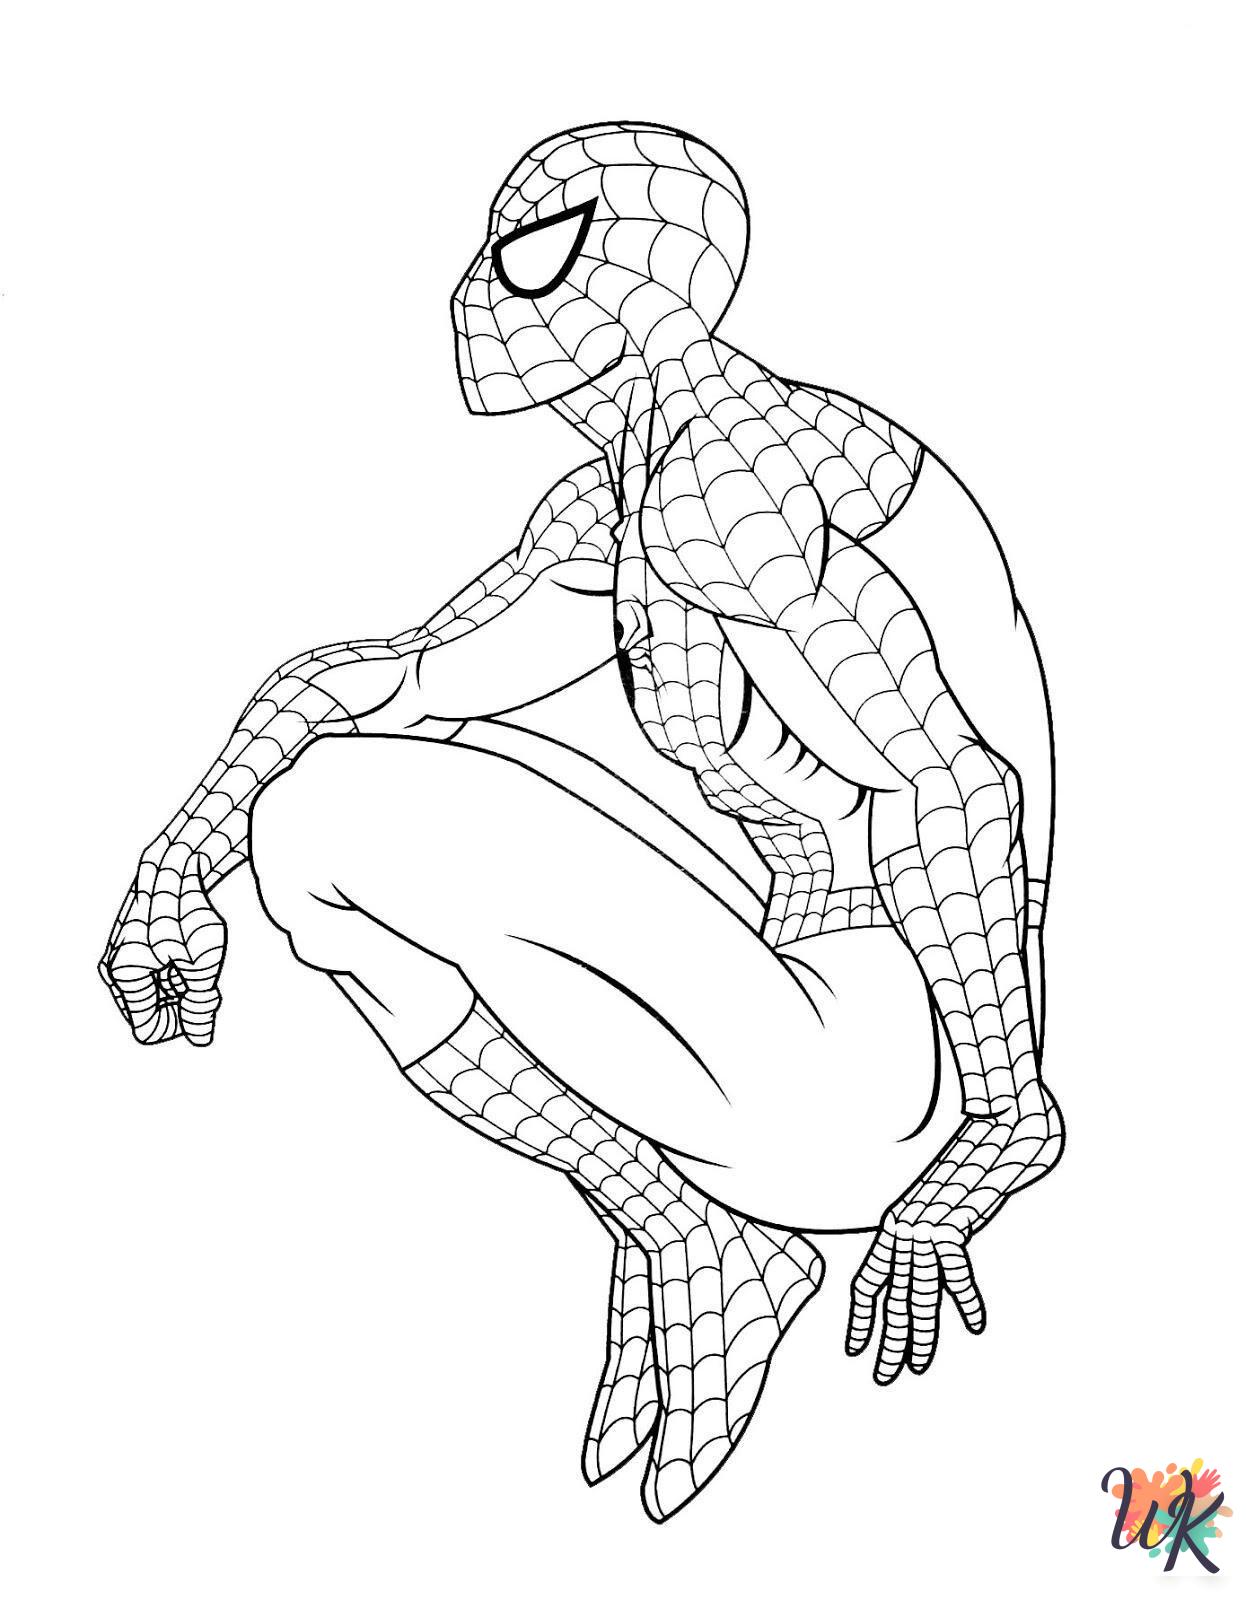 free full size printable Superhero coloring pages for adults pdf